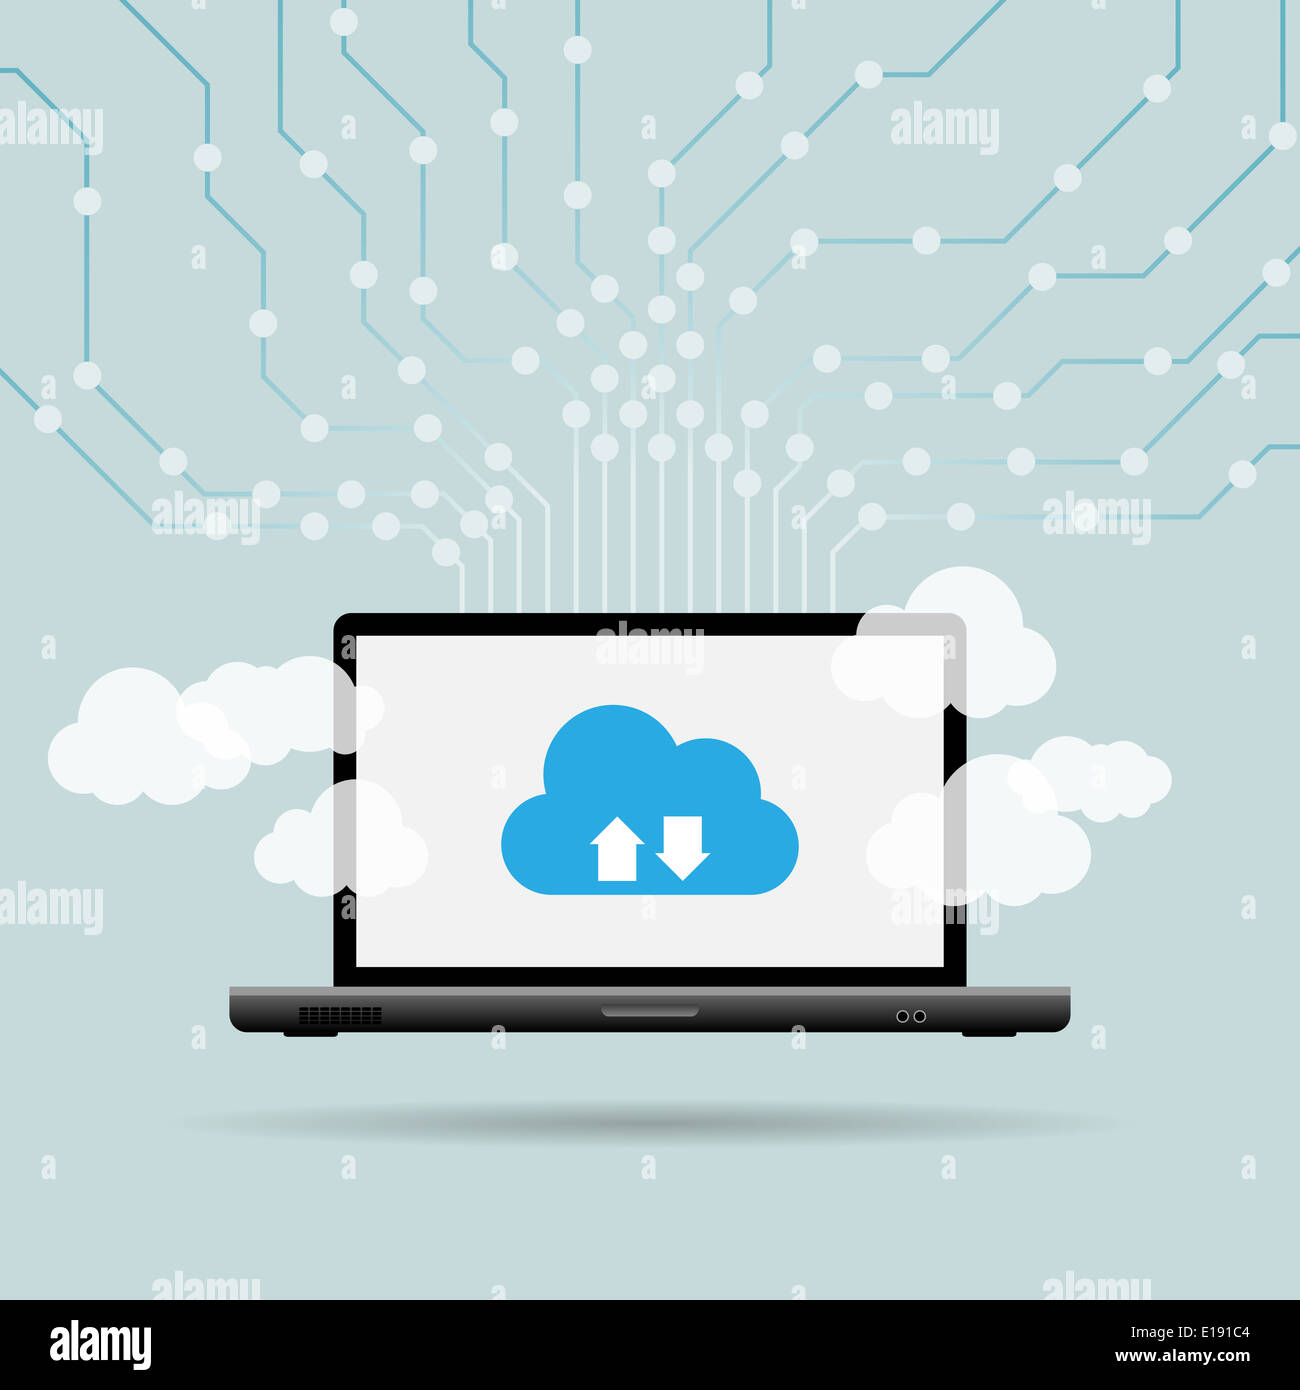 Vector illustration of cloud computing concept with laptop and cloud uplinks. Stock Photo